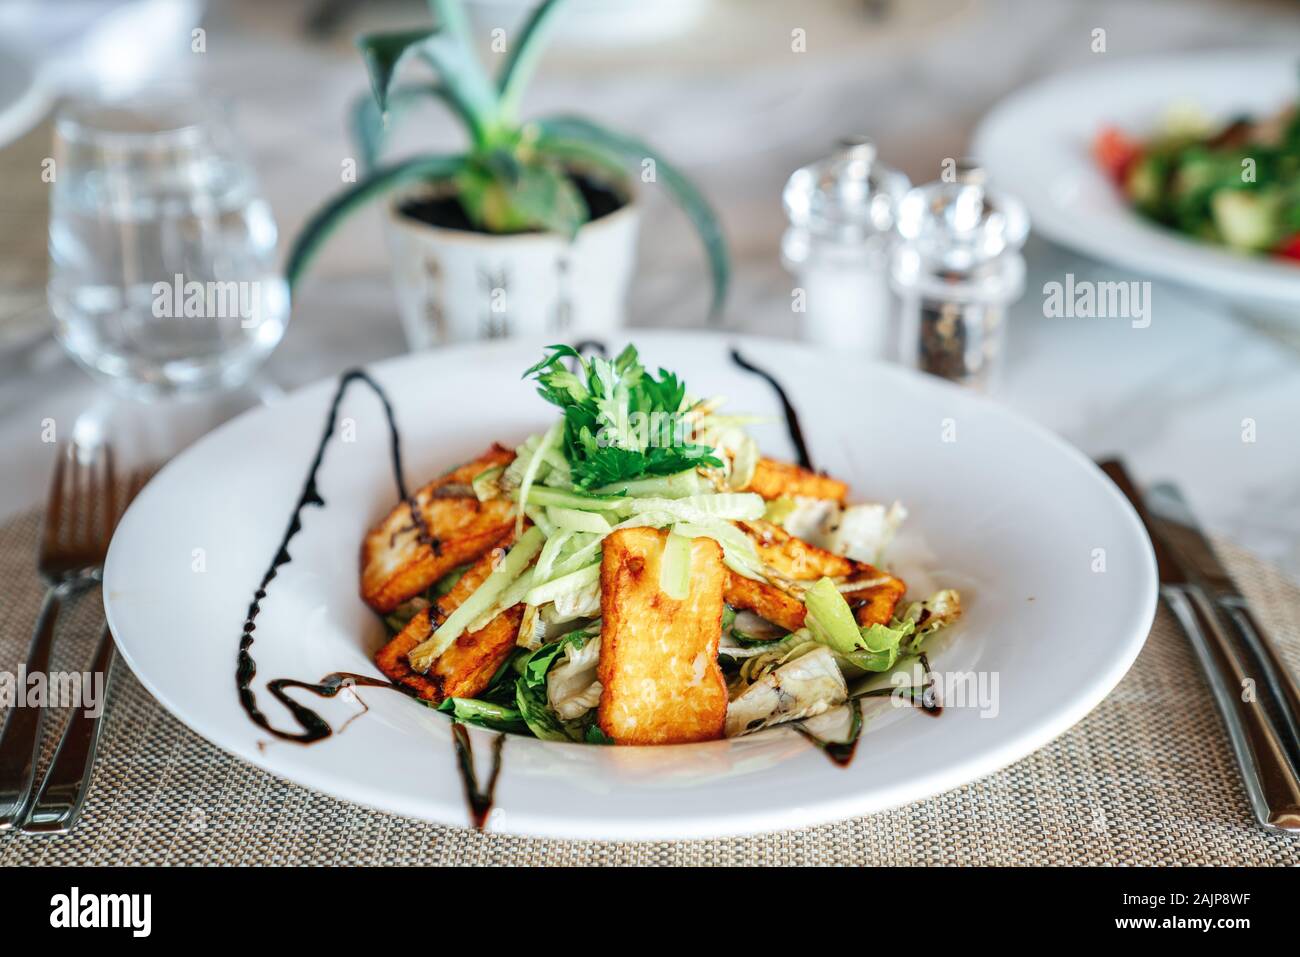 A delicious hellumi cheese salad is served in a elegance restaurant or hotel. Stock Photo